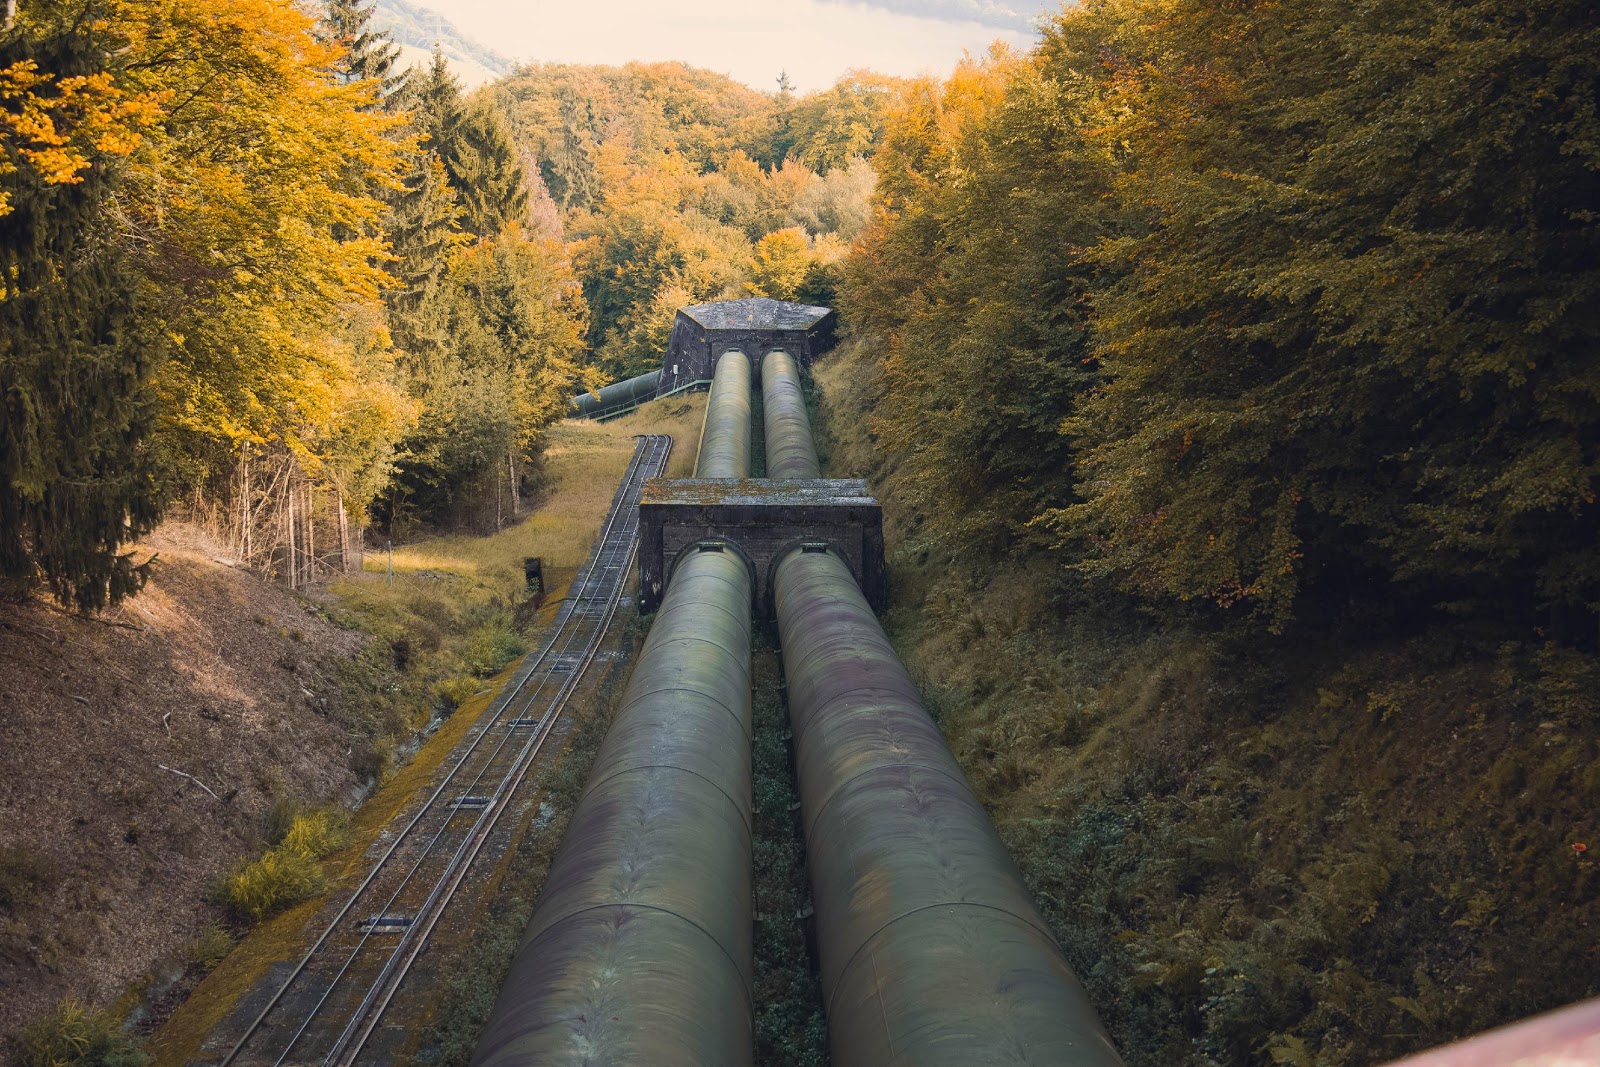 COLONIAL PIPELINE